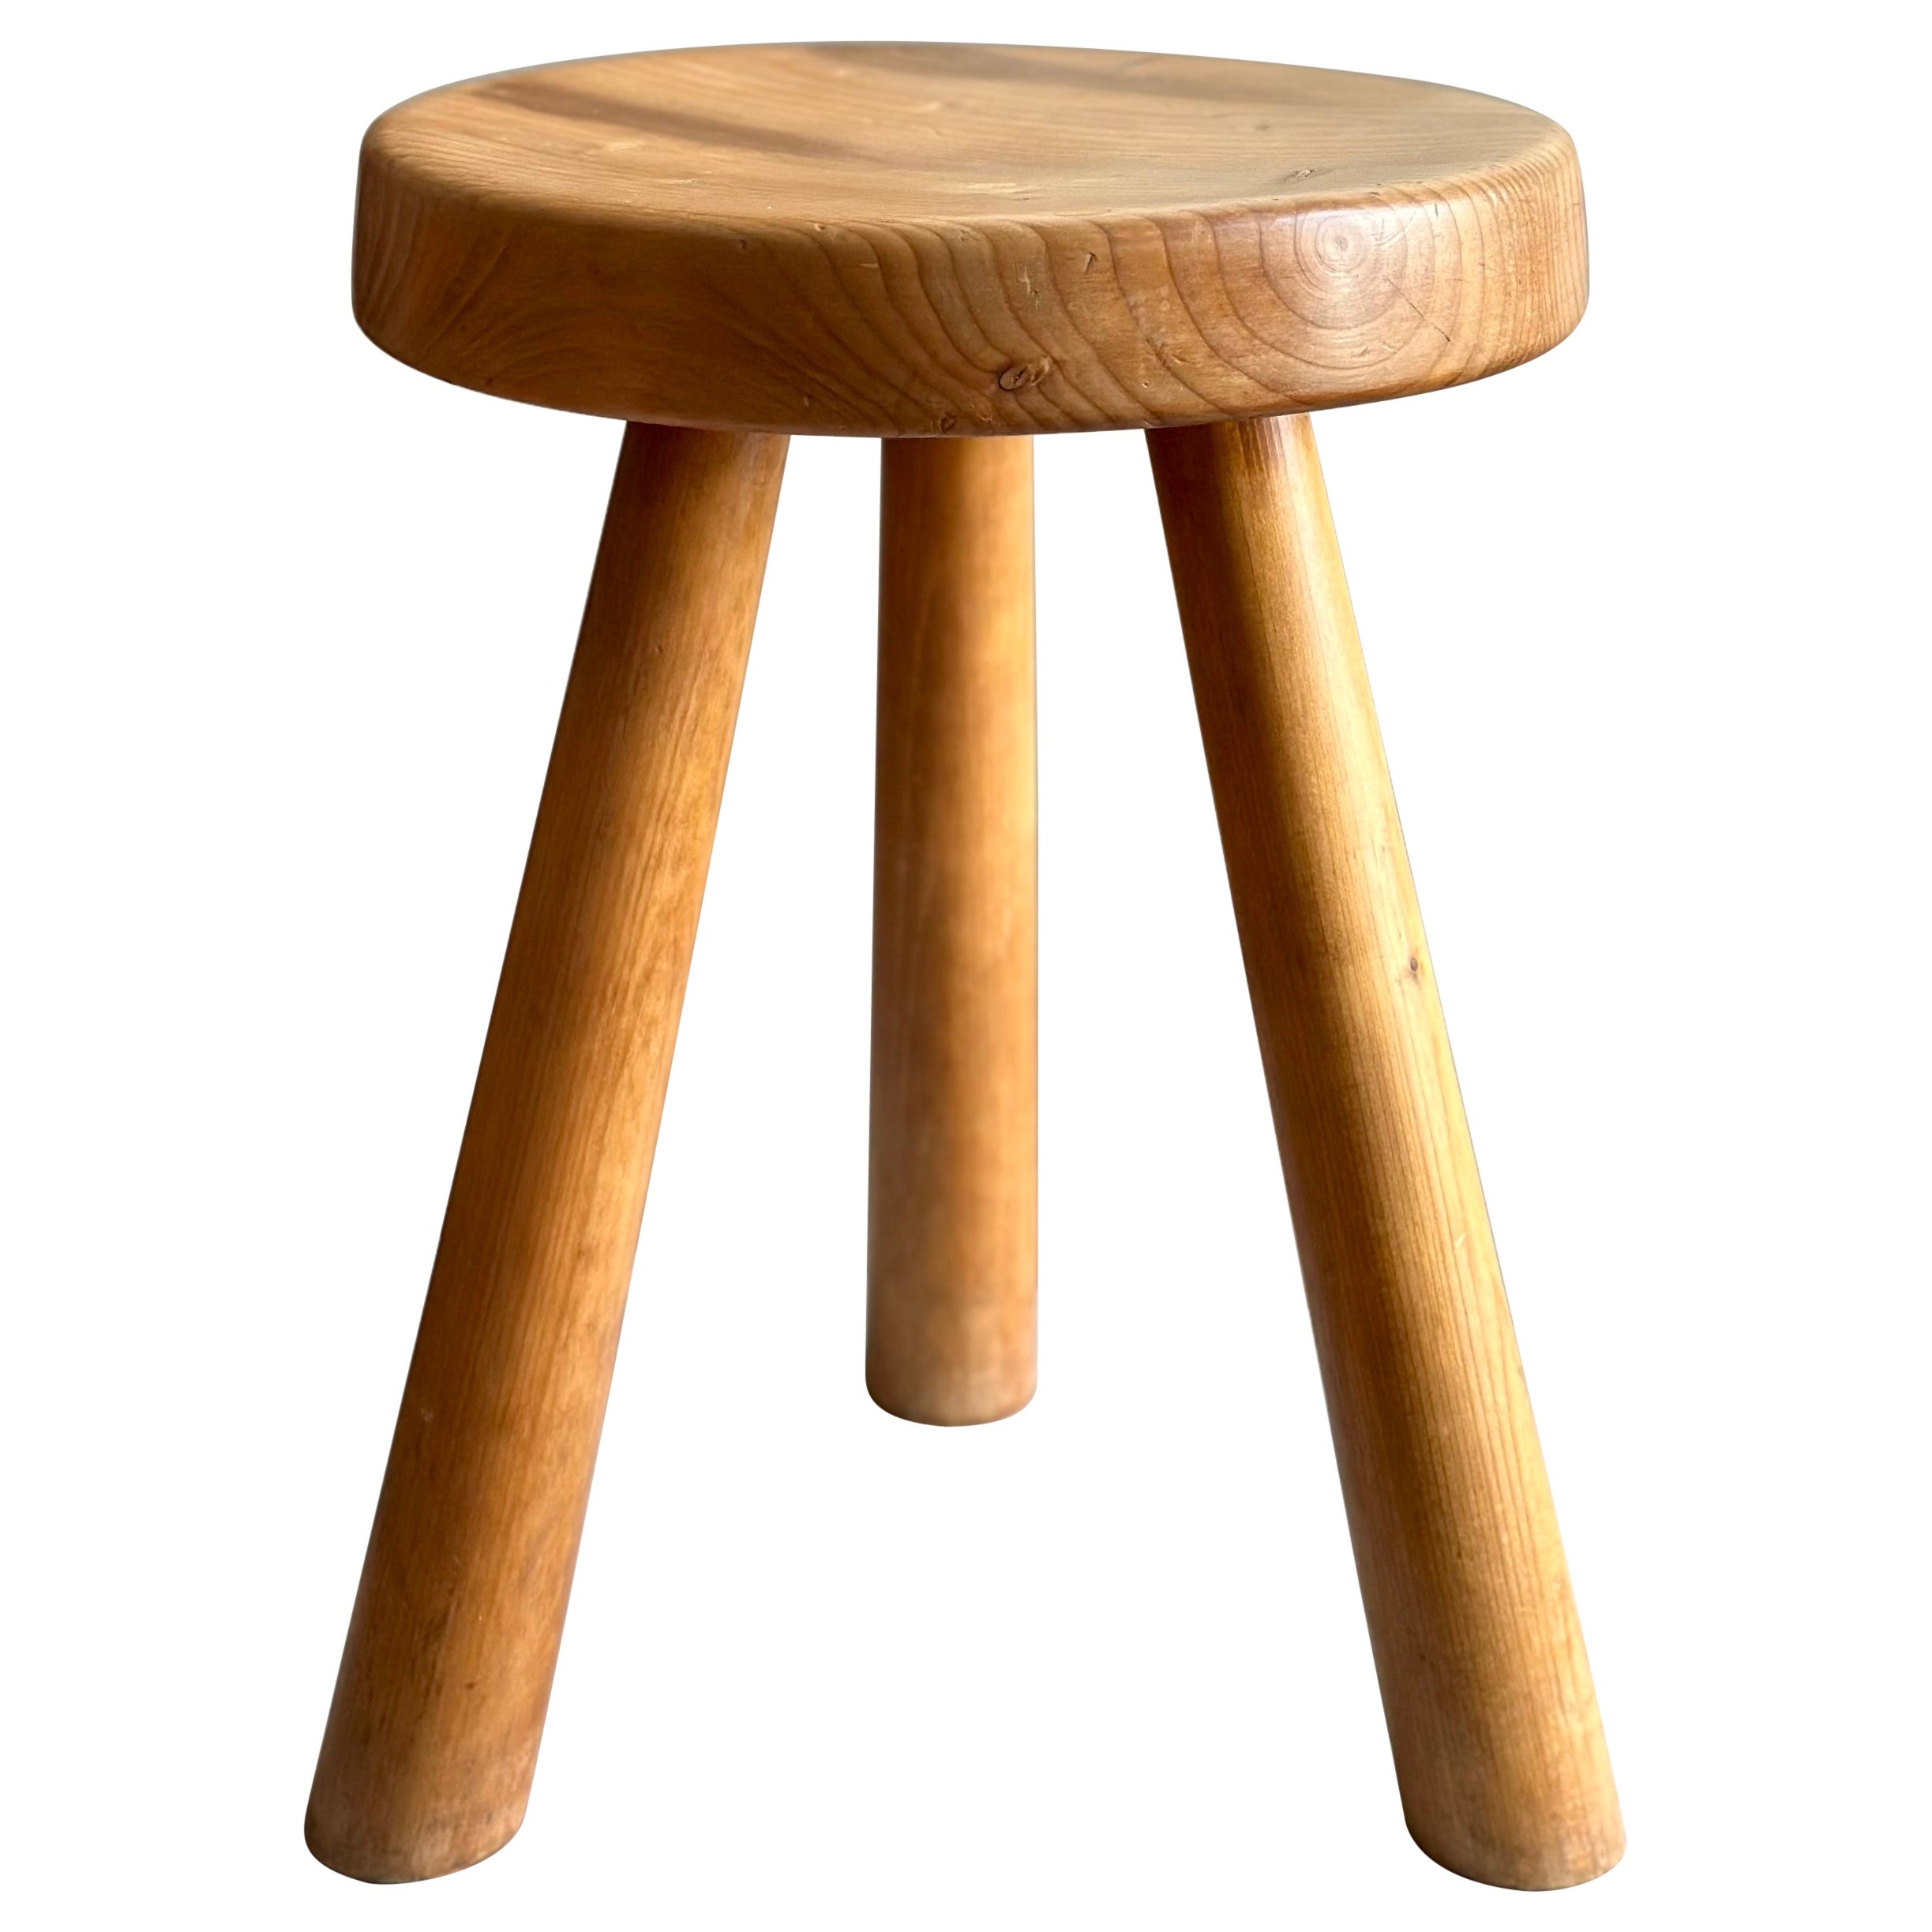 Charlotte Perriand Tripod Stool in Pine for Les Arcs, 1960s For Sale